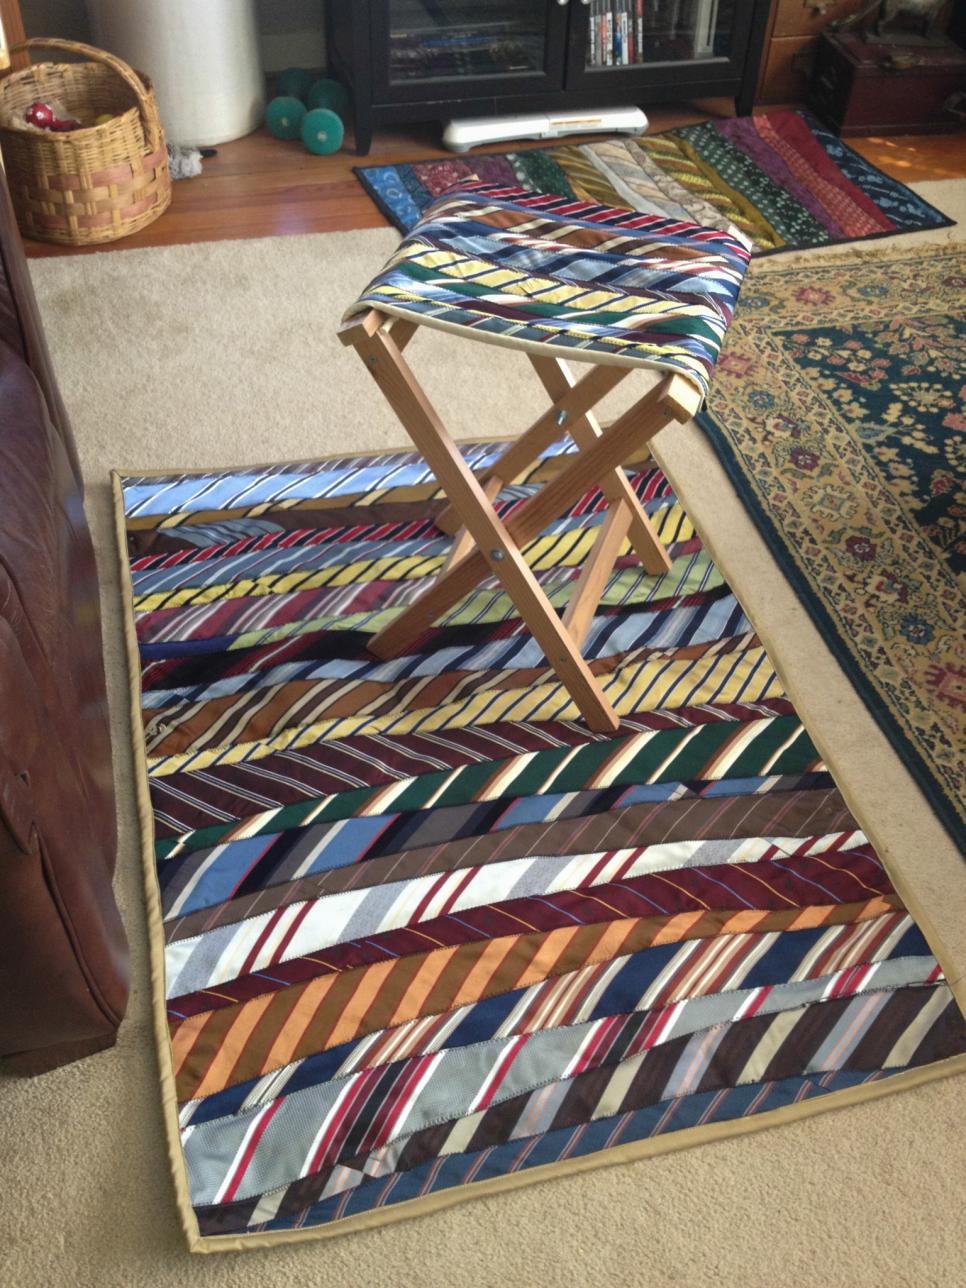 Neck tie area rug and stool